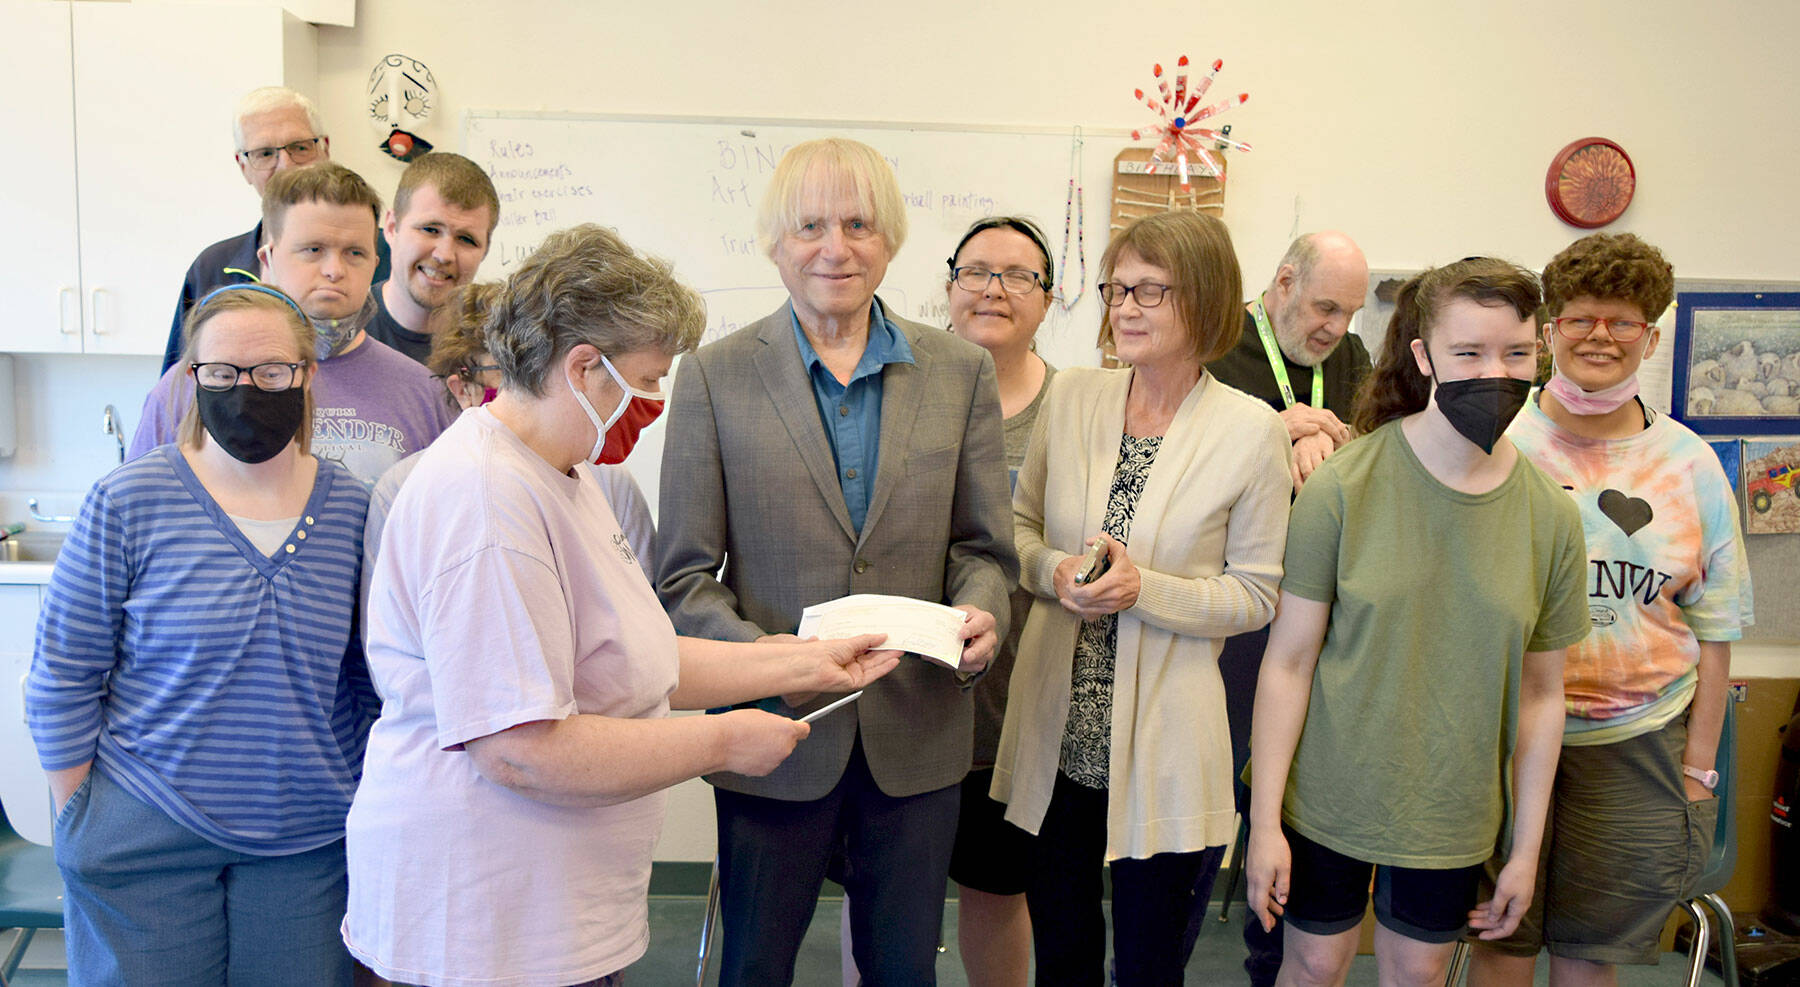 Pictured in the front row, left to right are Ruthie Brandt, Beth Walker, Homer Smith, Cynthia McNulty and Crissy Gelderd. In the middle row, from left to right, Spencer Hay, Andrew Nichol, Kira Kersting (hidden), Mandy Bingham, Stacey Shipley and Violet Snodgrass. George Will, Clallam Mosaic instructor and community engagement coach, is in the back. (Photo by Catherine McKinney)